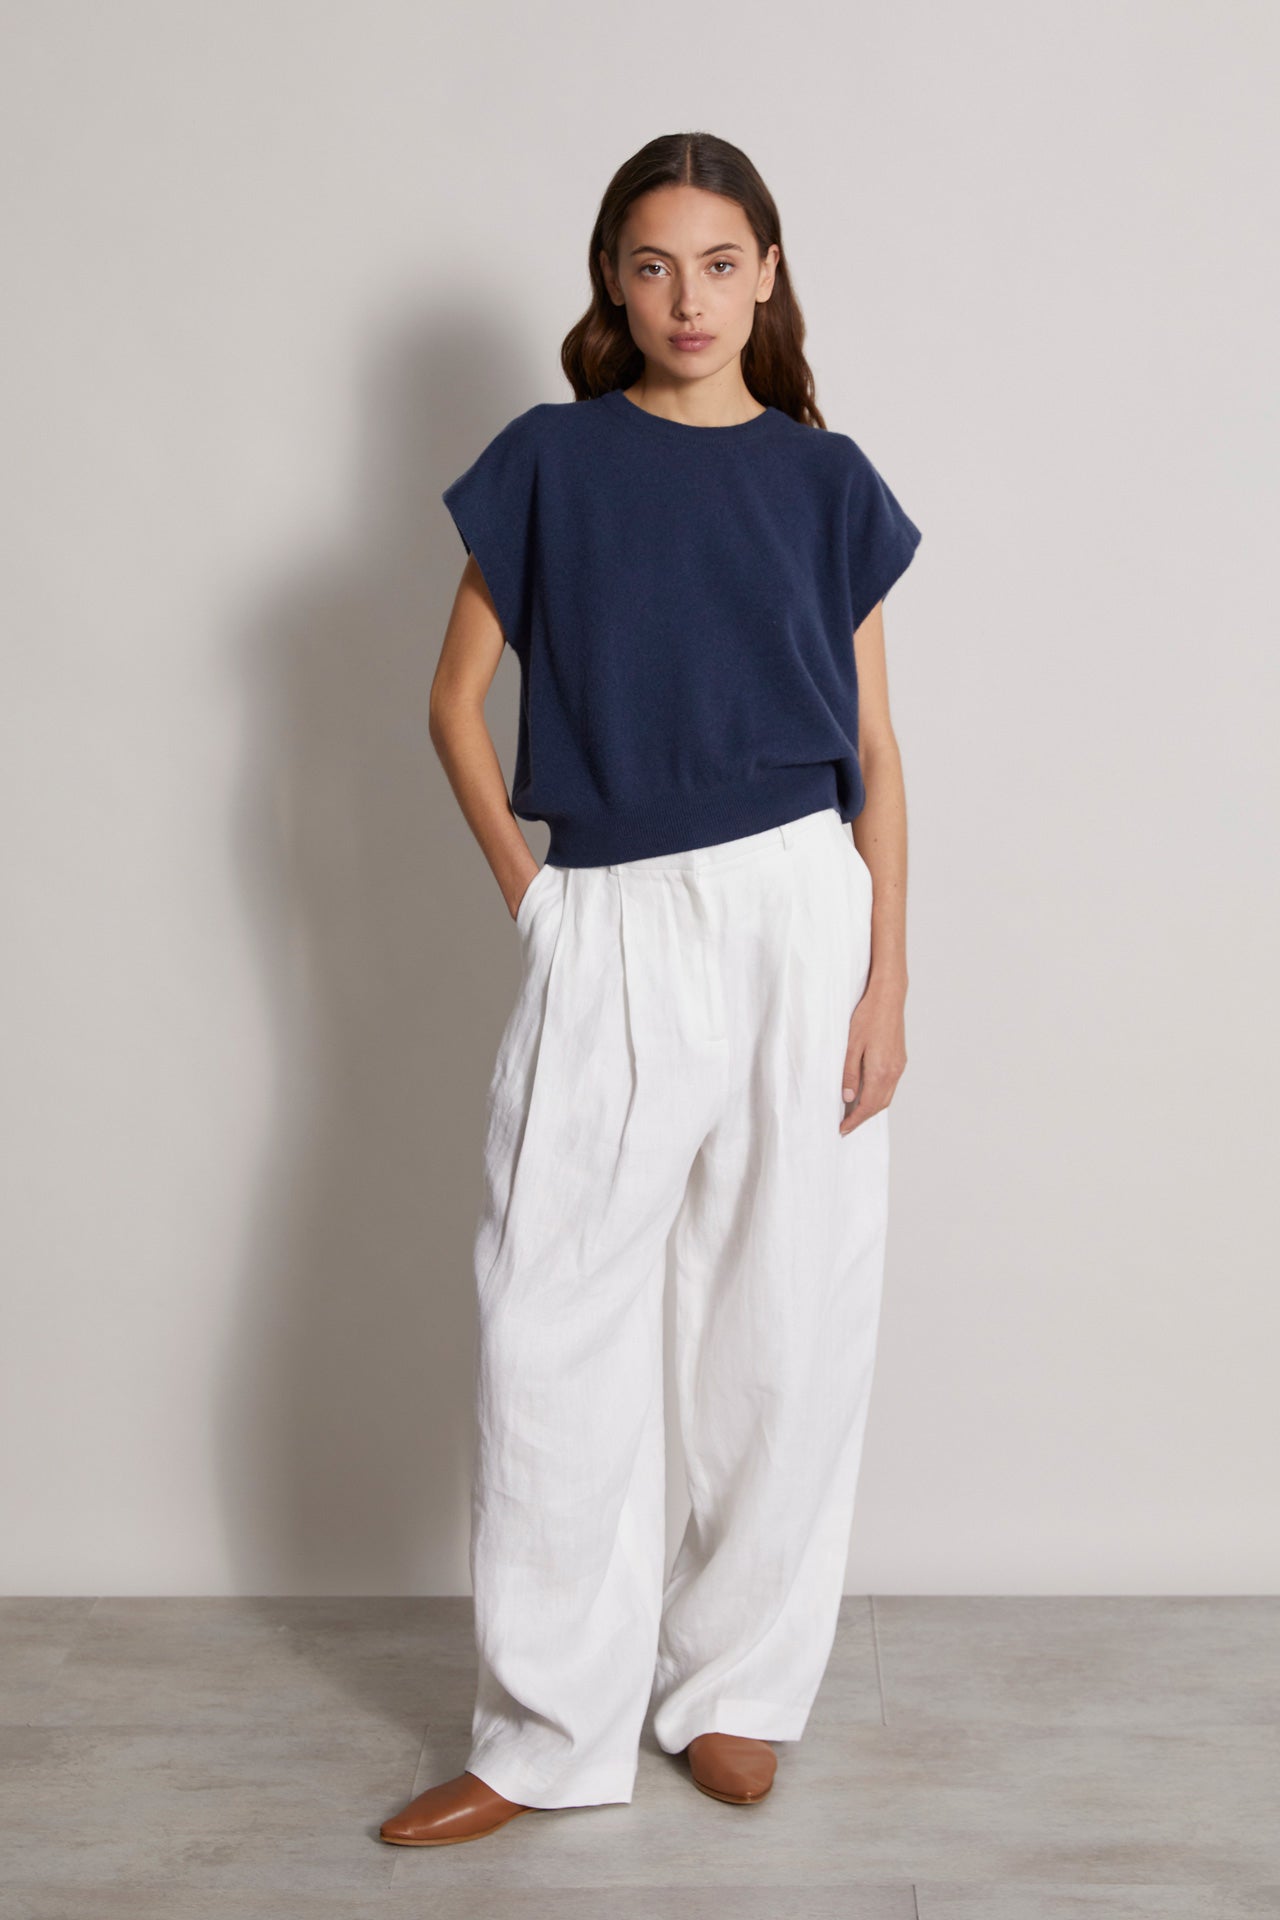 Giglio linen pants